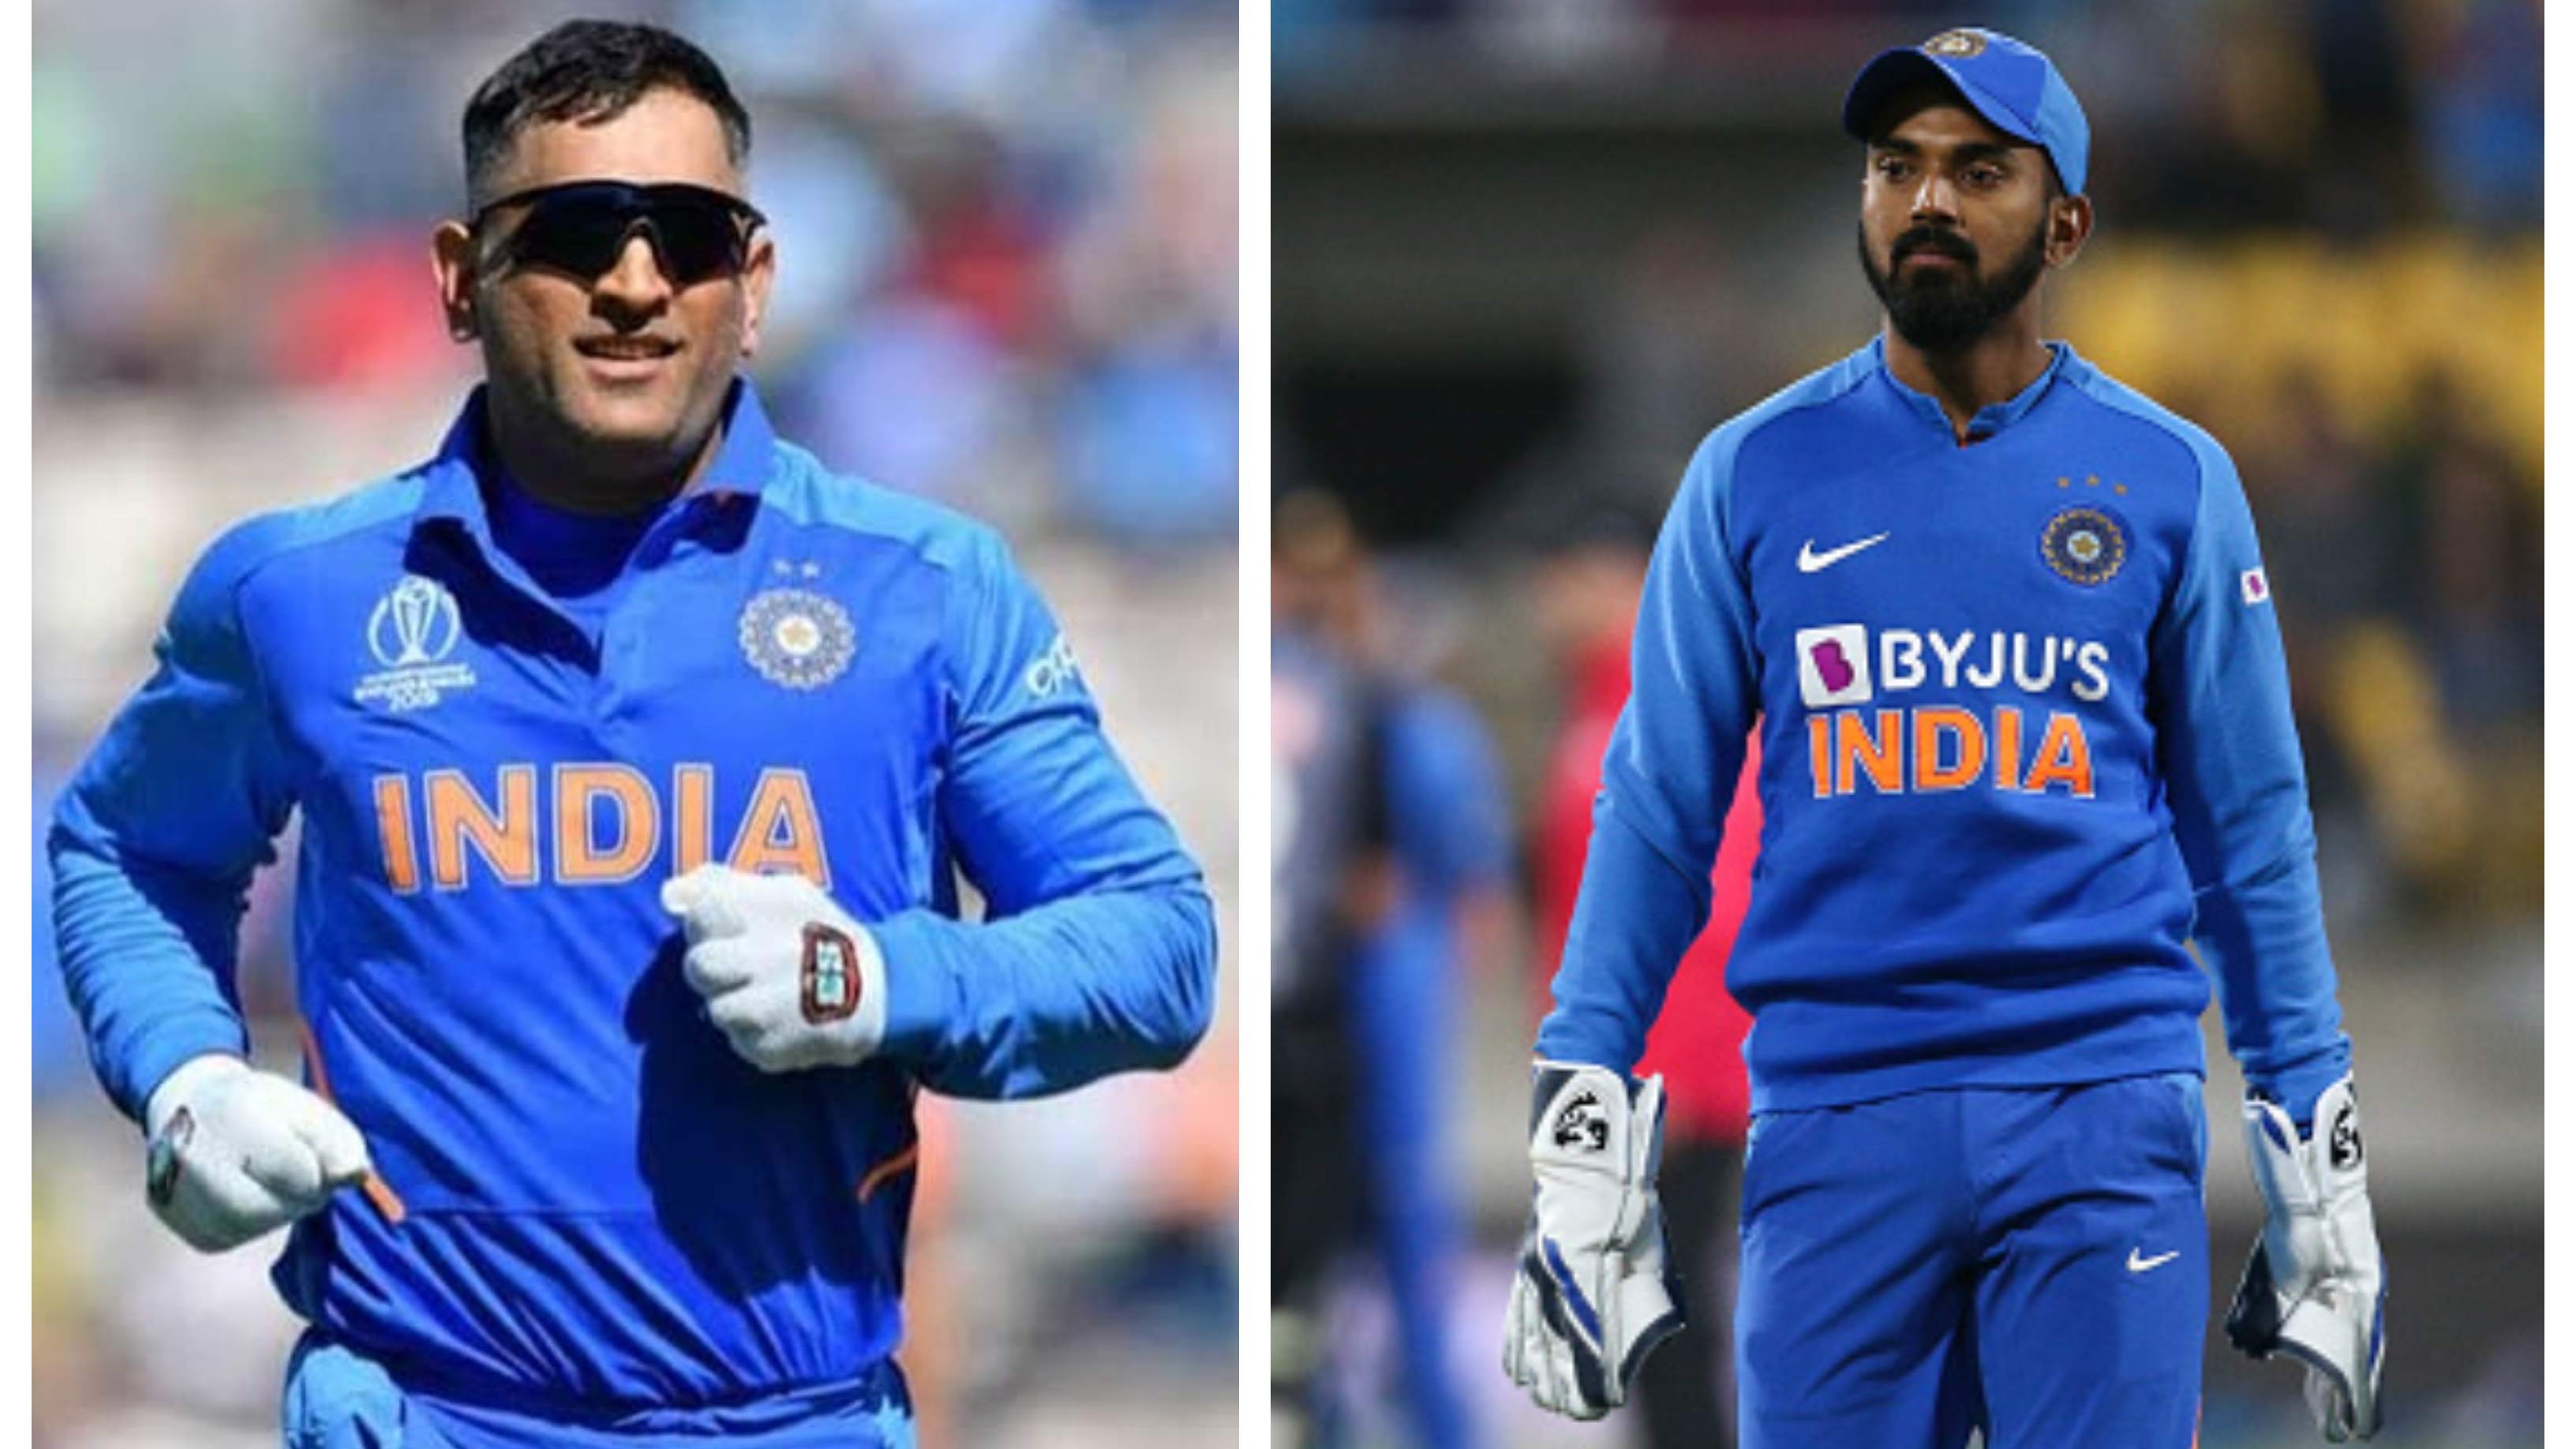 KL Rahul acknowledges the pressure of replacing MS Dhoni behind wickets